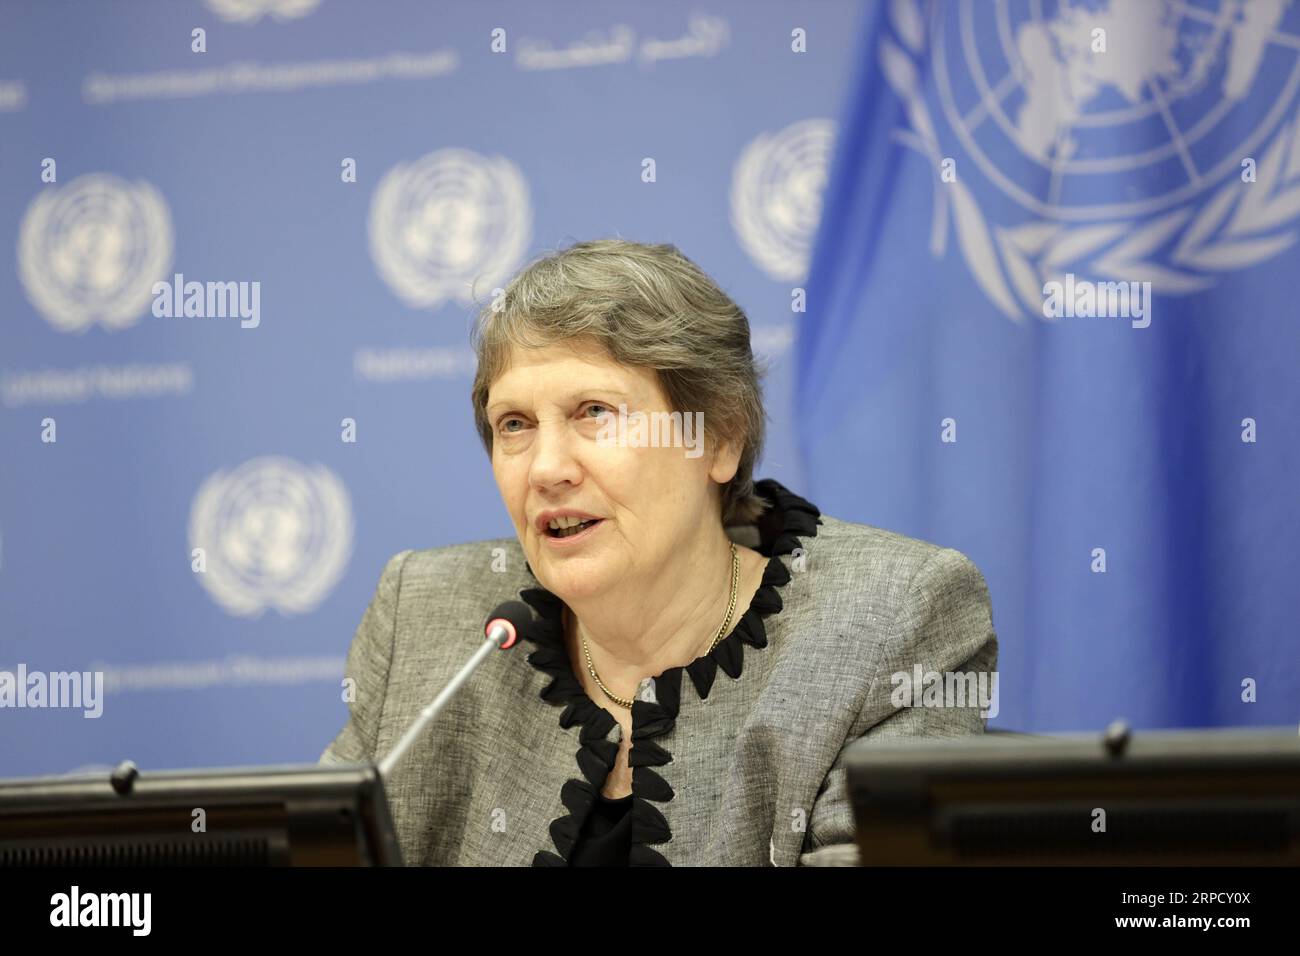 (190715) -- UNITED NATIONS, July 15, 2019 -- Former Prime Minister of New Zealand Helen Clark speaks to journalists during a press briefing on gender equality and women s leadership for a sustainable world, at the UN headquarters in New York, July 15, 2019. UN General Assembly President Maria Fernanda Espinosa Garces on Monday called on the international community to support women s rights and empowerment. ) UN-UNGA PRESIDENT-GENDER EQUALITY-WOMEN S LEADERSHIP-PRESS BRIEFING LixMuzi PUBLICATIONxNOTxINxCHN Stock Photo